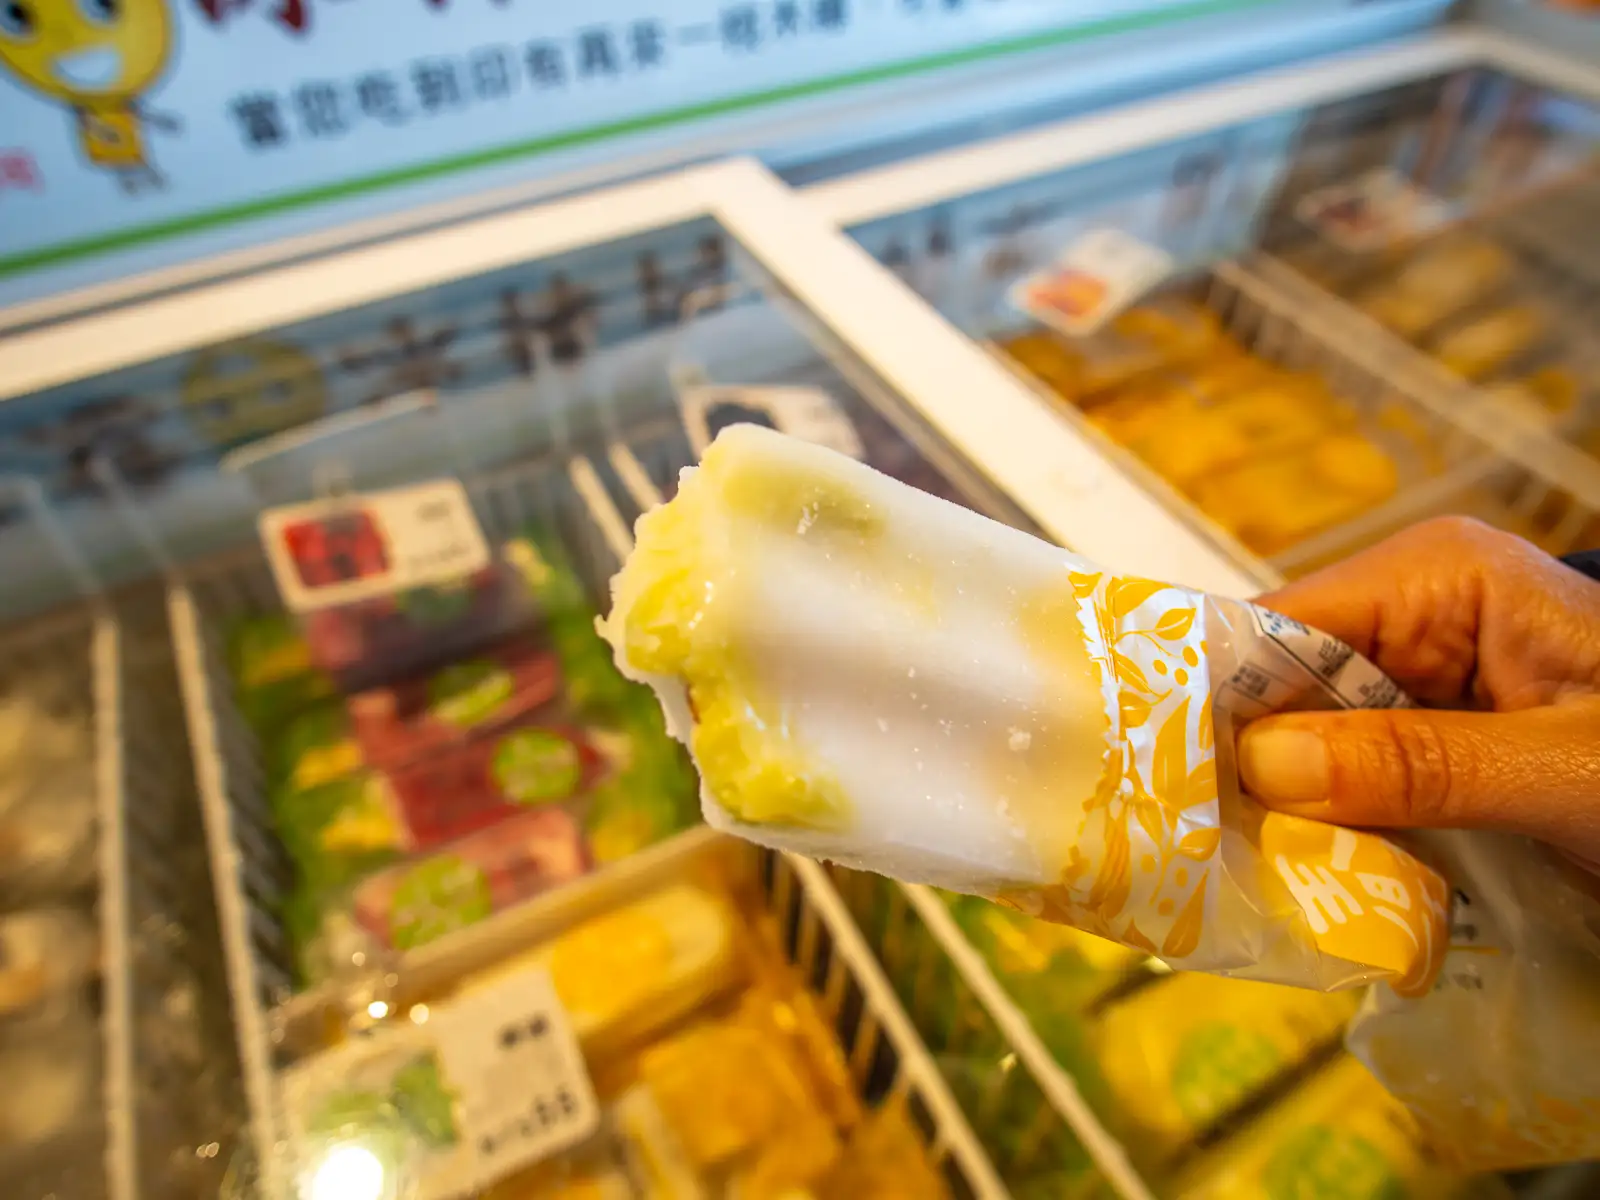 A mango green ice pop with a bite taken out of it.